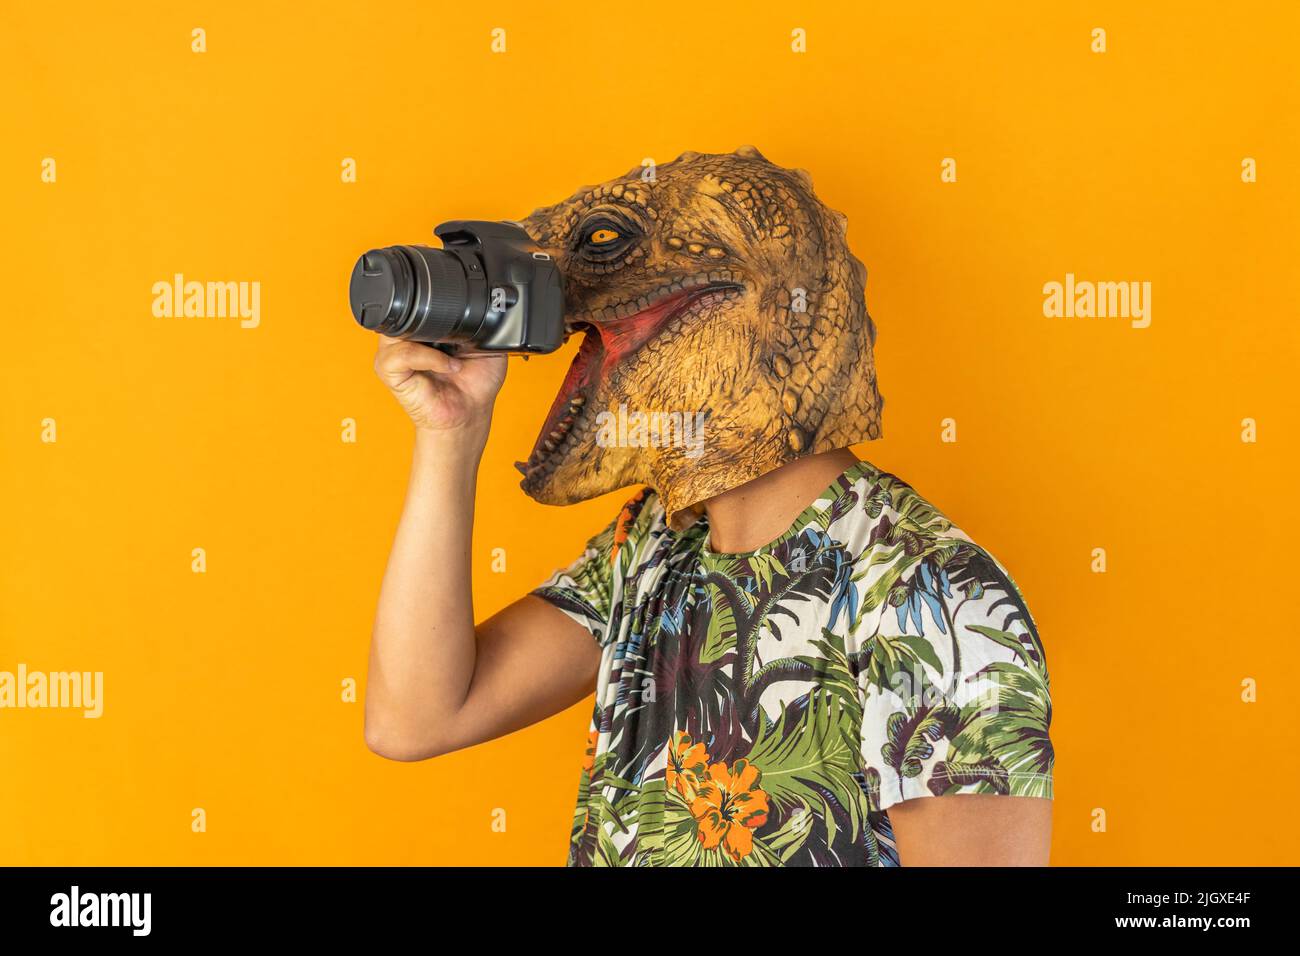 Man taking picture with professional camera wearing animal head mask isolated on yellow background Stock Photo